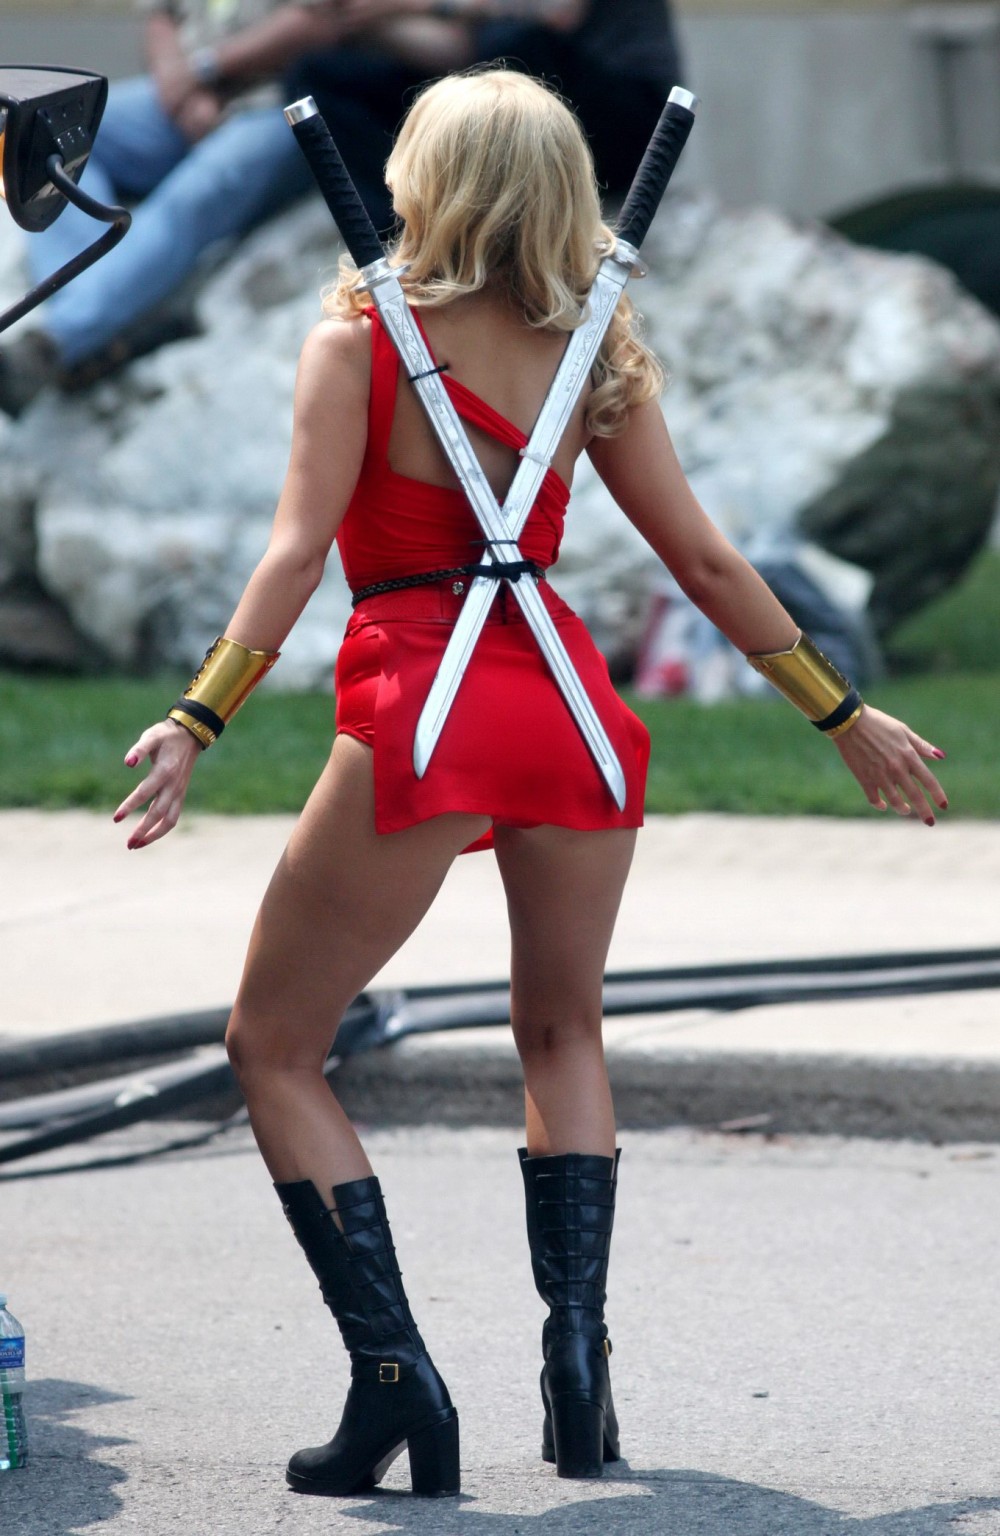 Ashley Benson shows off her ass and cleavage wearing a skimpy red outfit on the  #75188758